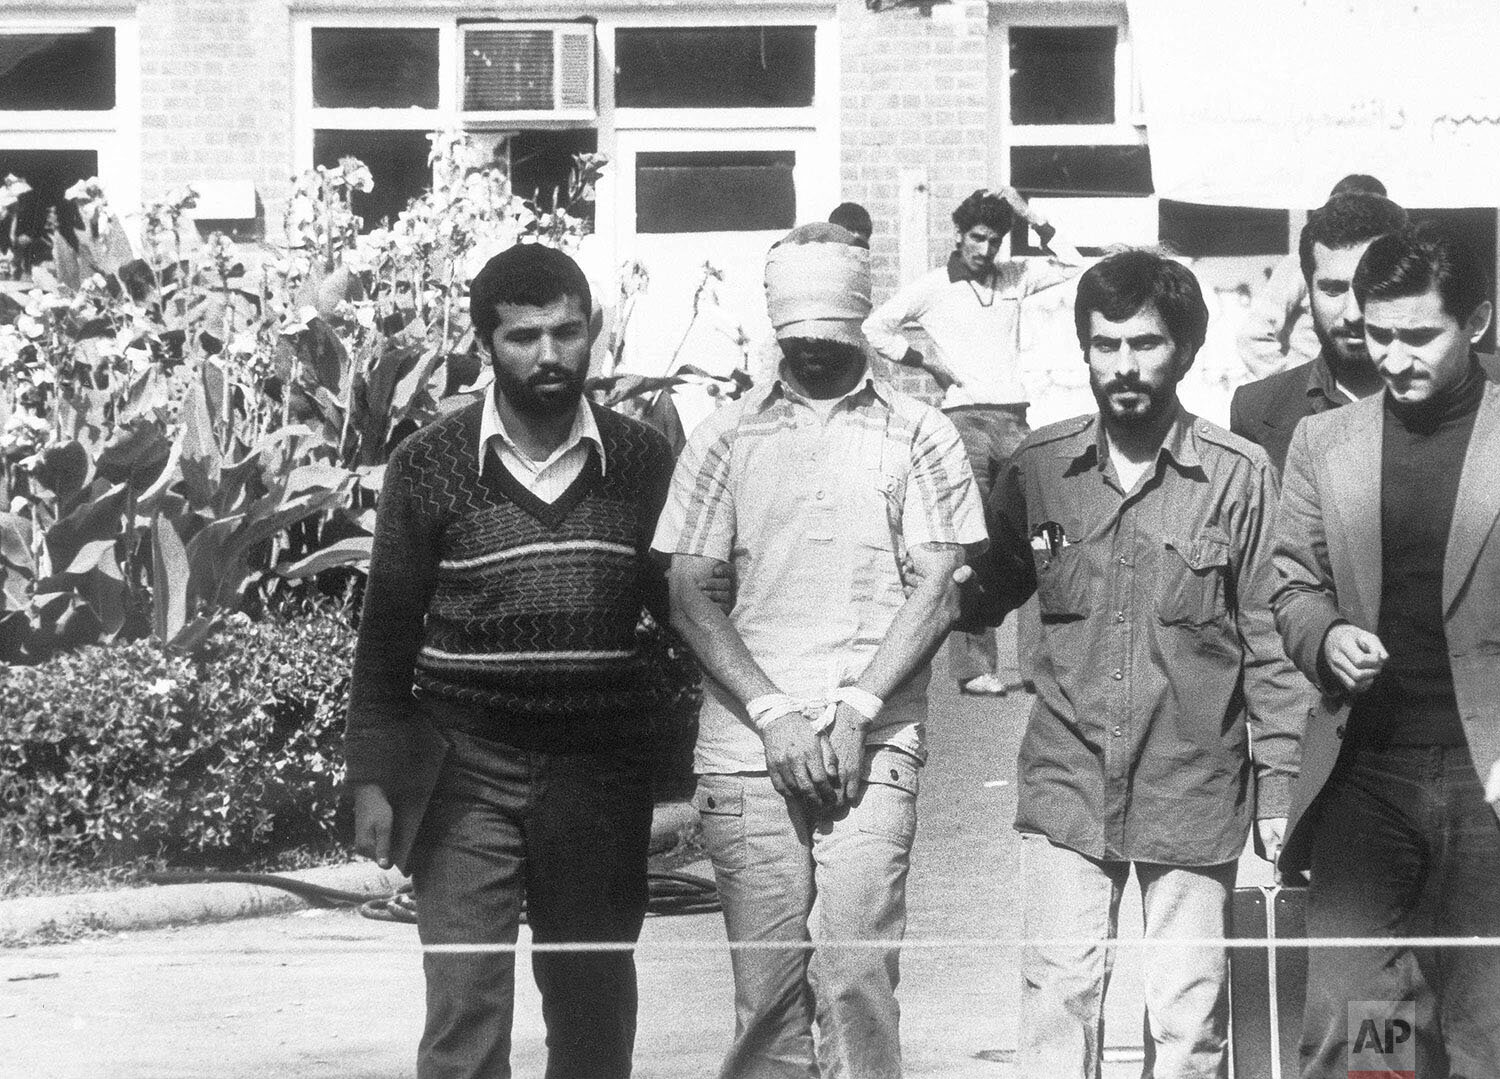  Blindfolded and hands bound, one of the hostages held at the U. S. Embassy in Tehran, Iran is shown to the crowd by Iranian students on Nov. 8, 1979. (AP Photo) 